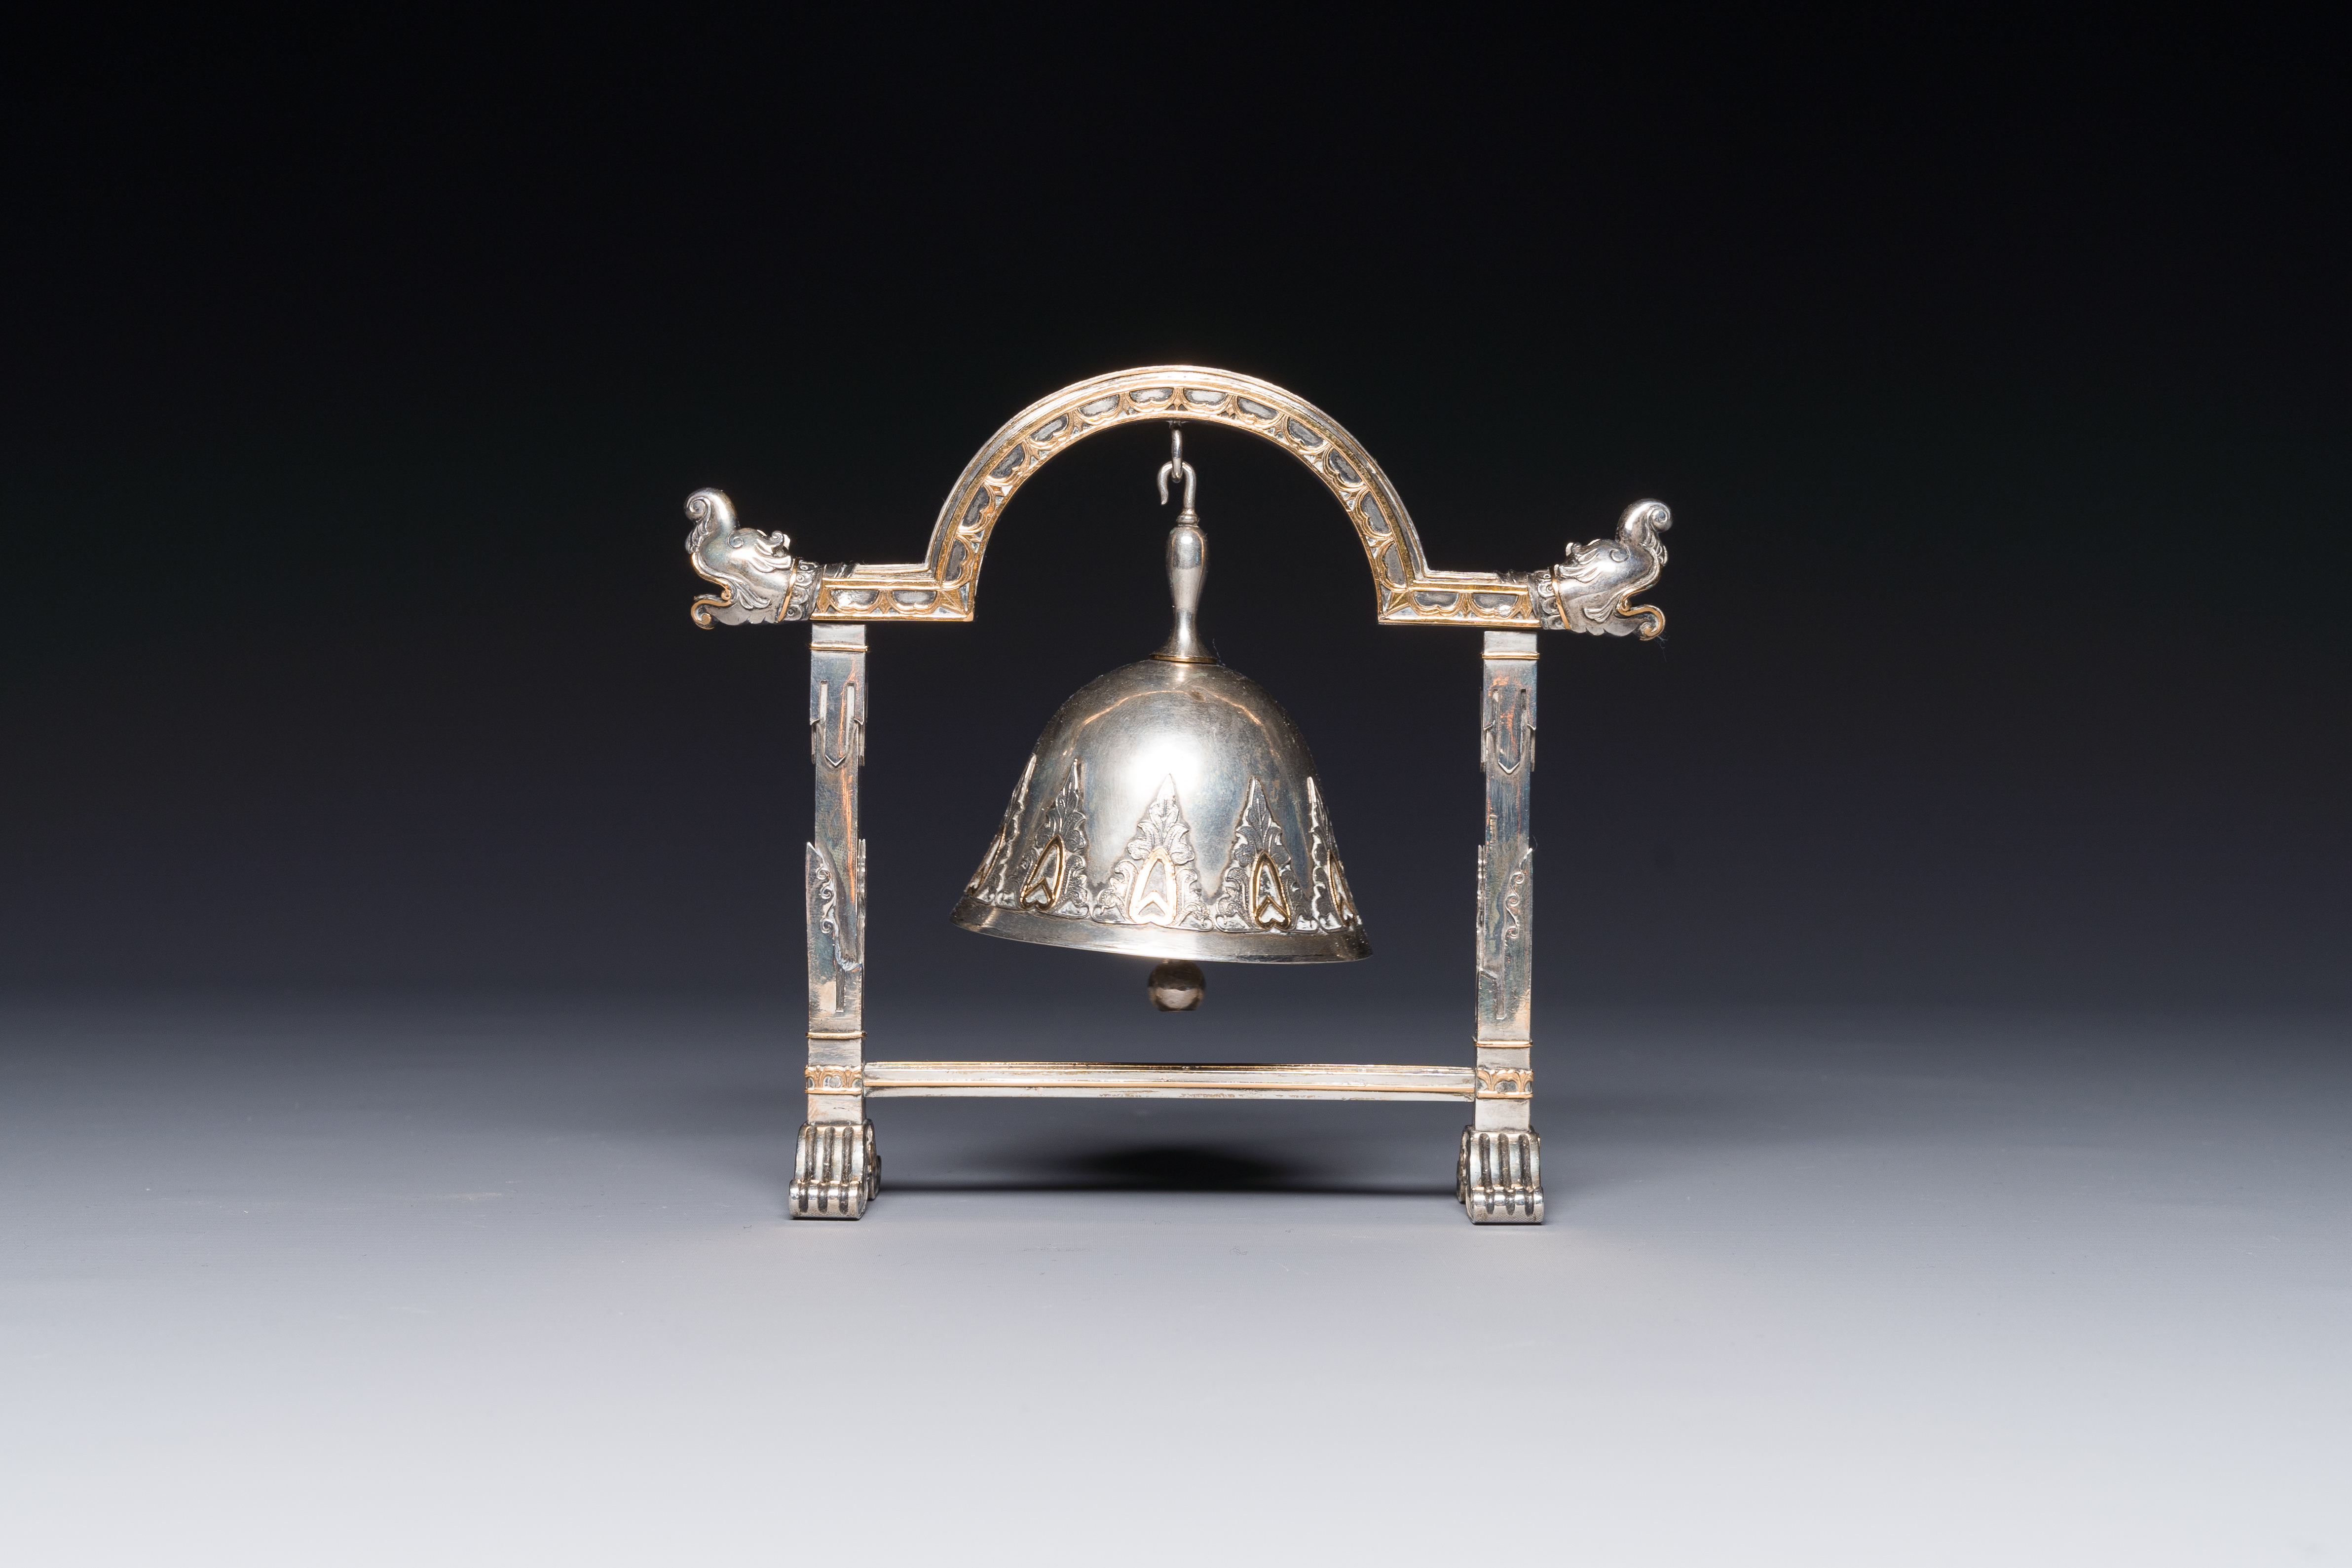 A fine parcel-gilt silver table bell or miniature gong, Southeast Asia, early 20th C. - Image 8 of 12